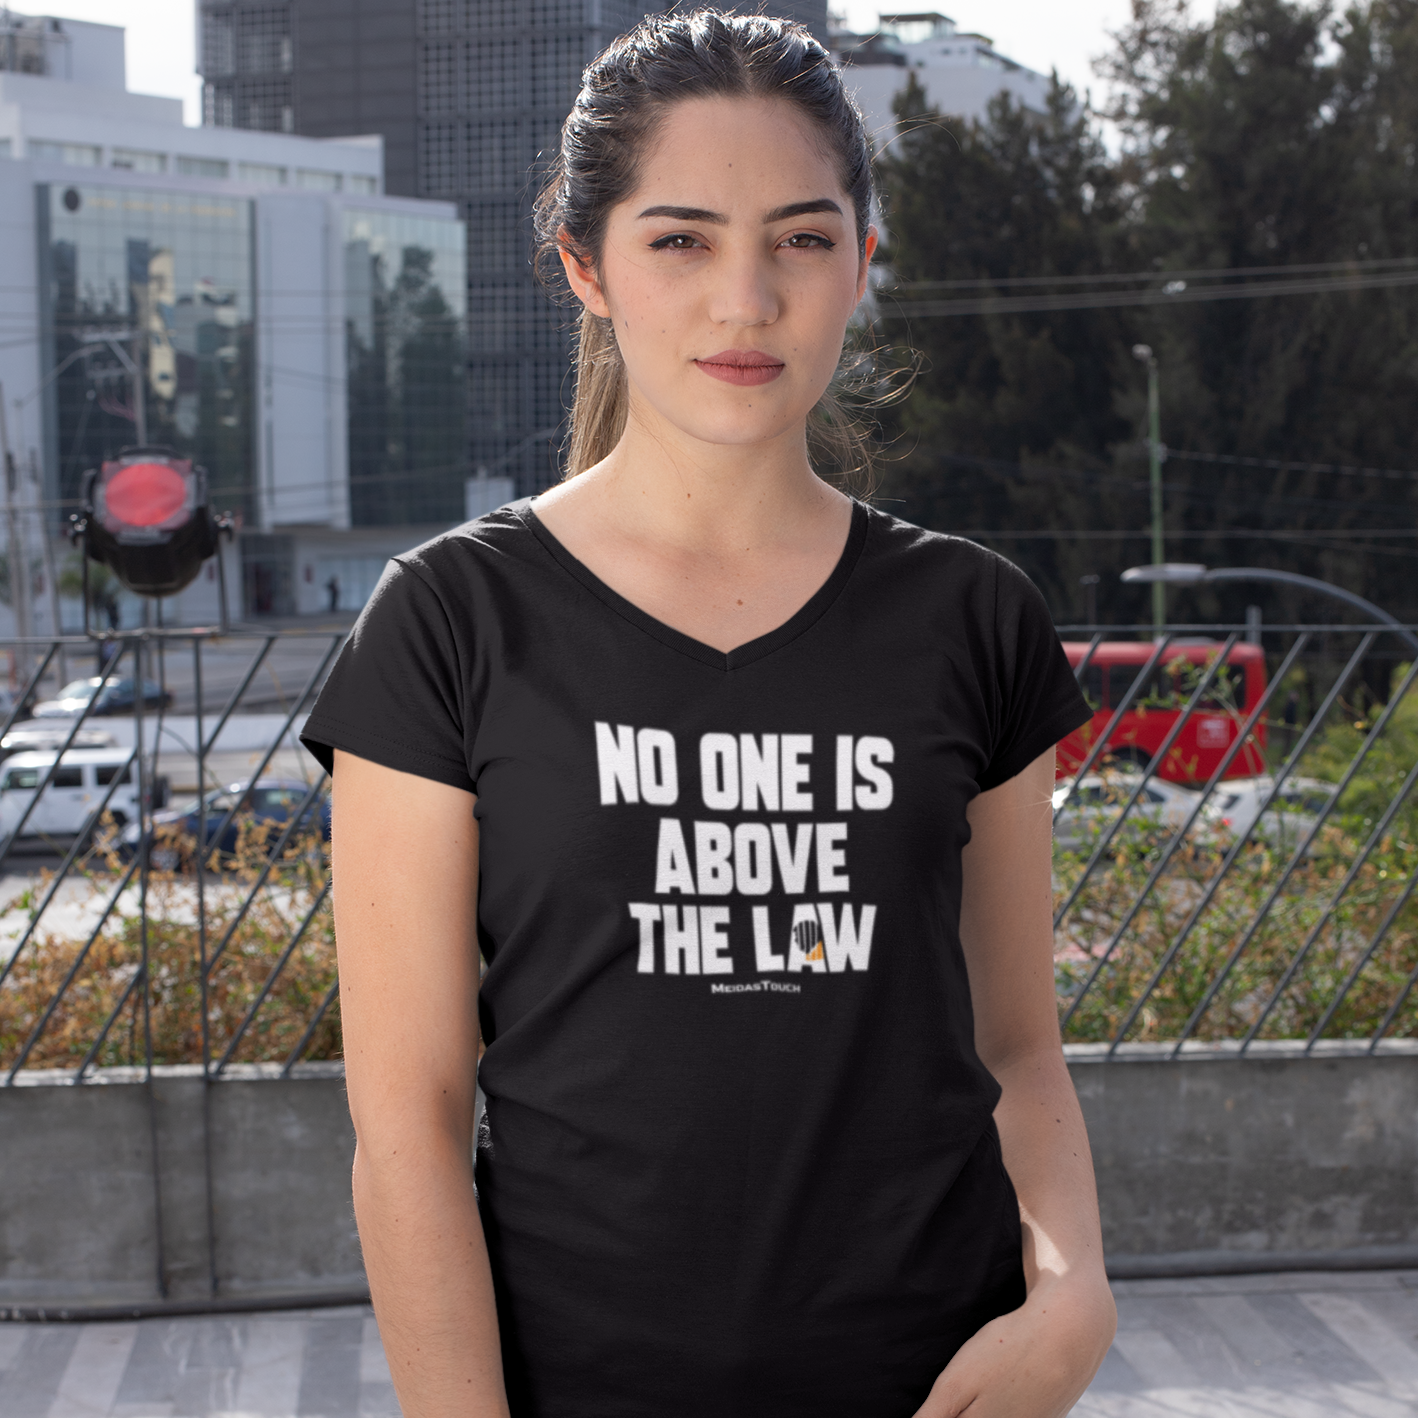 No One is Above the Law Tee